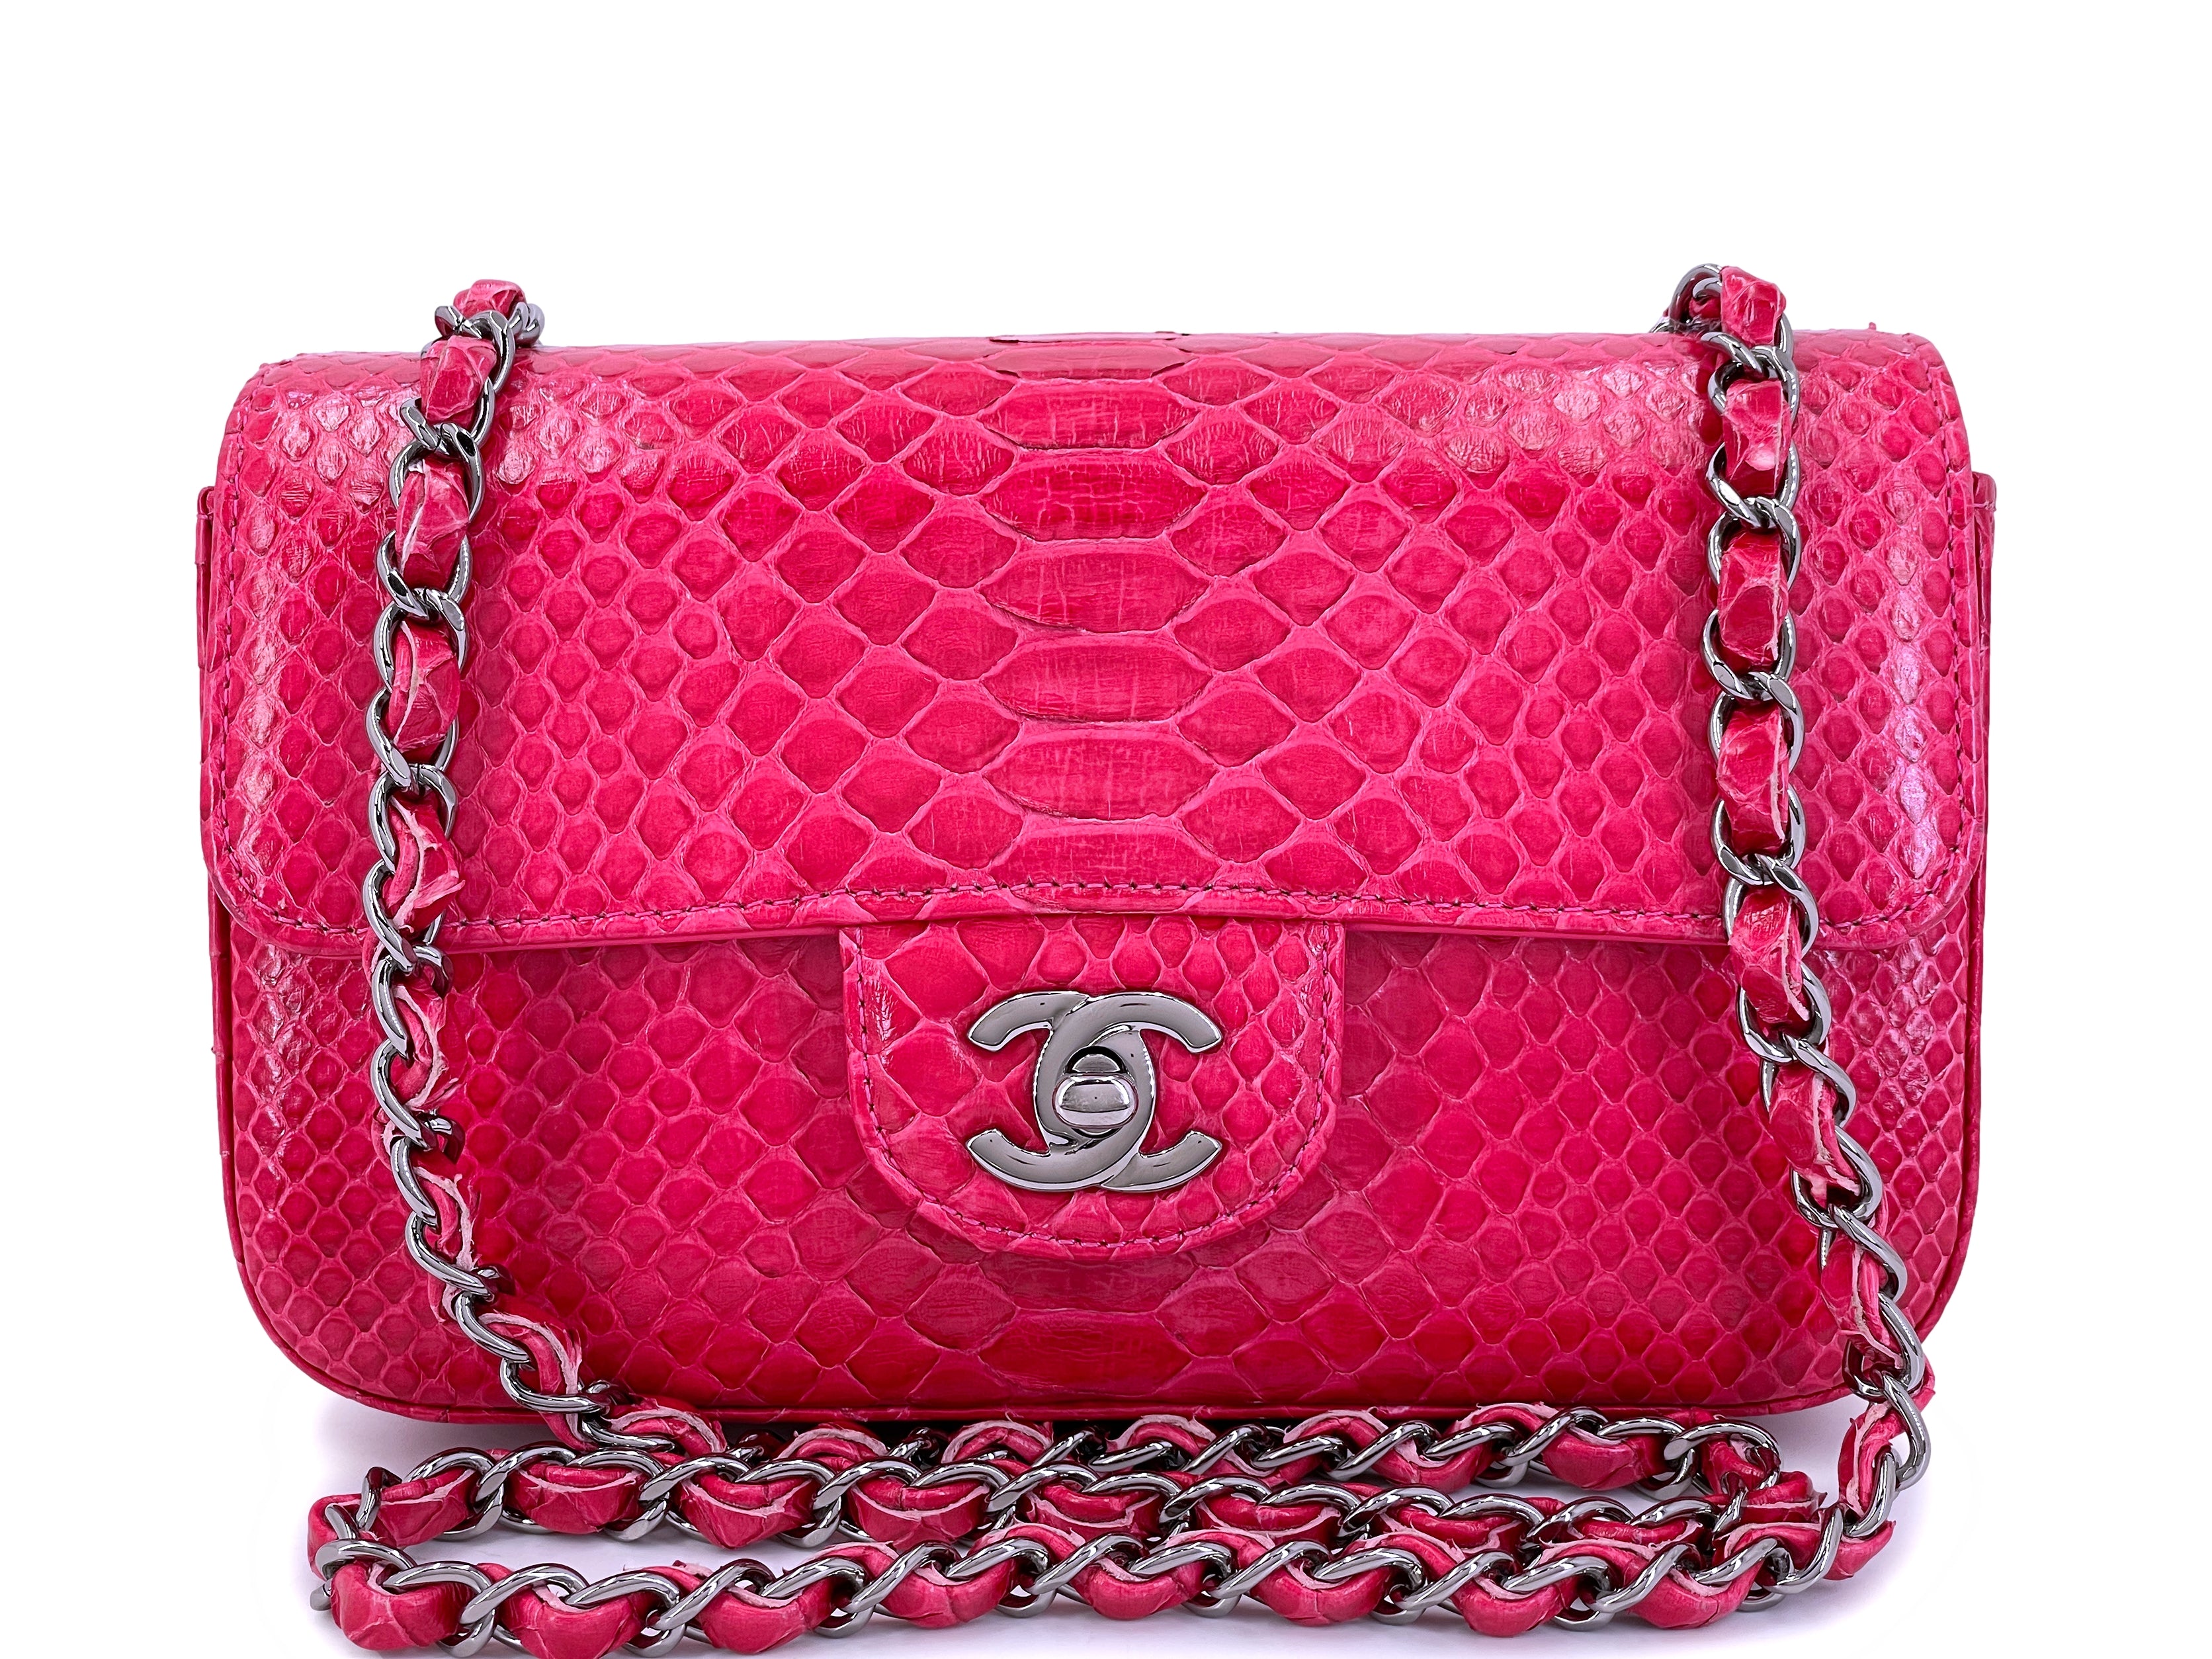 SHOP - CHANEL - Page 2 - VLuxeStyle